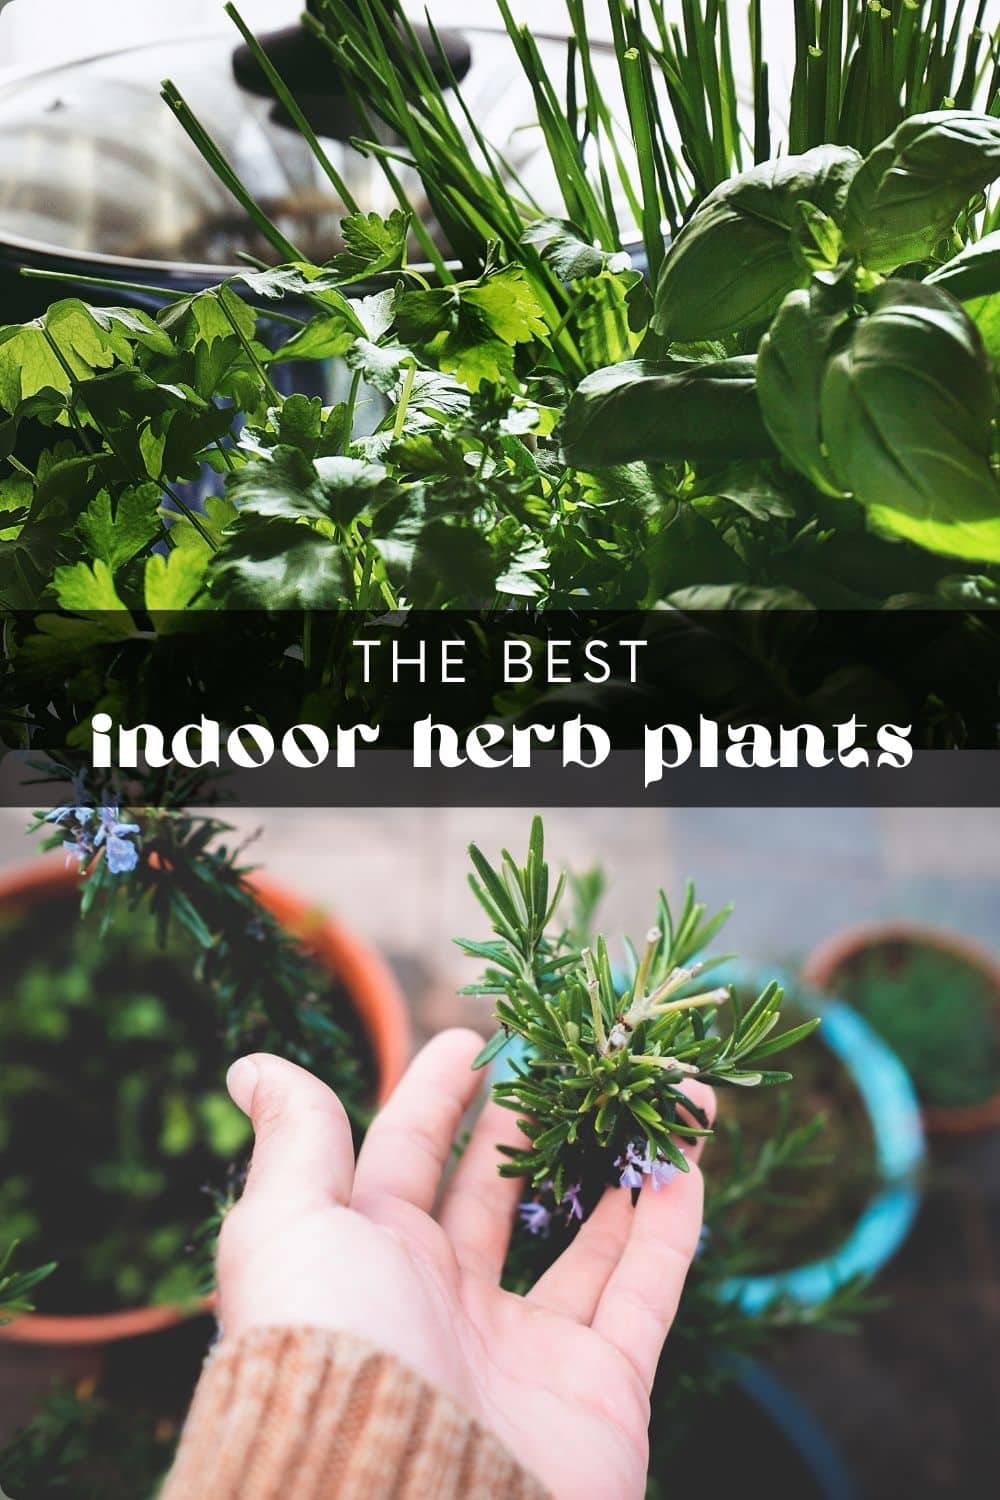 Don't worry if you lack outdoor space or a green thumb – plenty of herbs thrive indoors! Not only do these fresh herbs provide delicious flavor for your cooking, but growing herbs indoors adds freshness and life to your home. Many plants thrive in an indoor herb garden, so you can easily choose the best ones for your space!